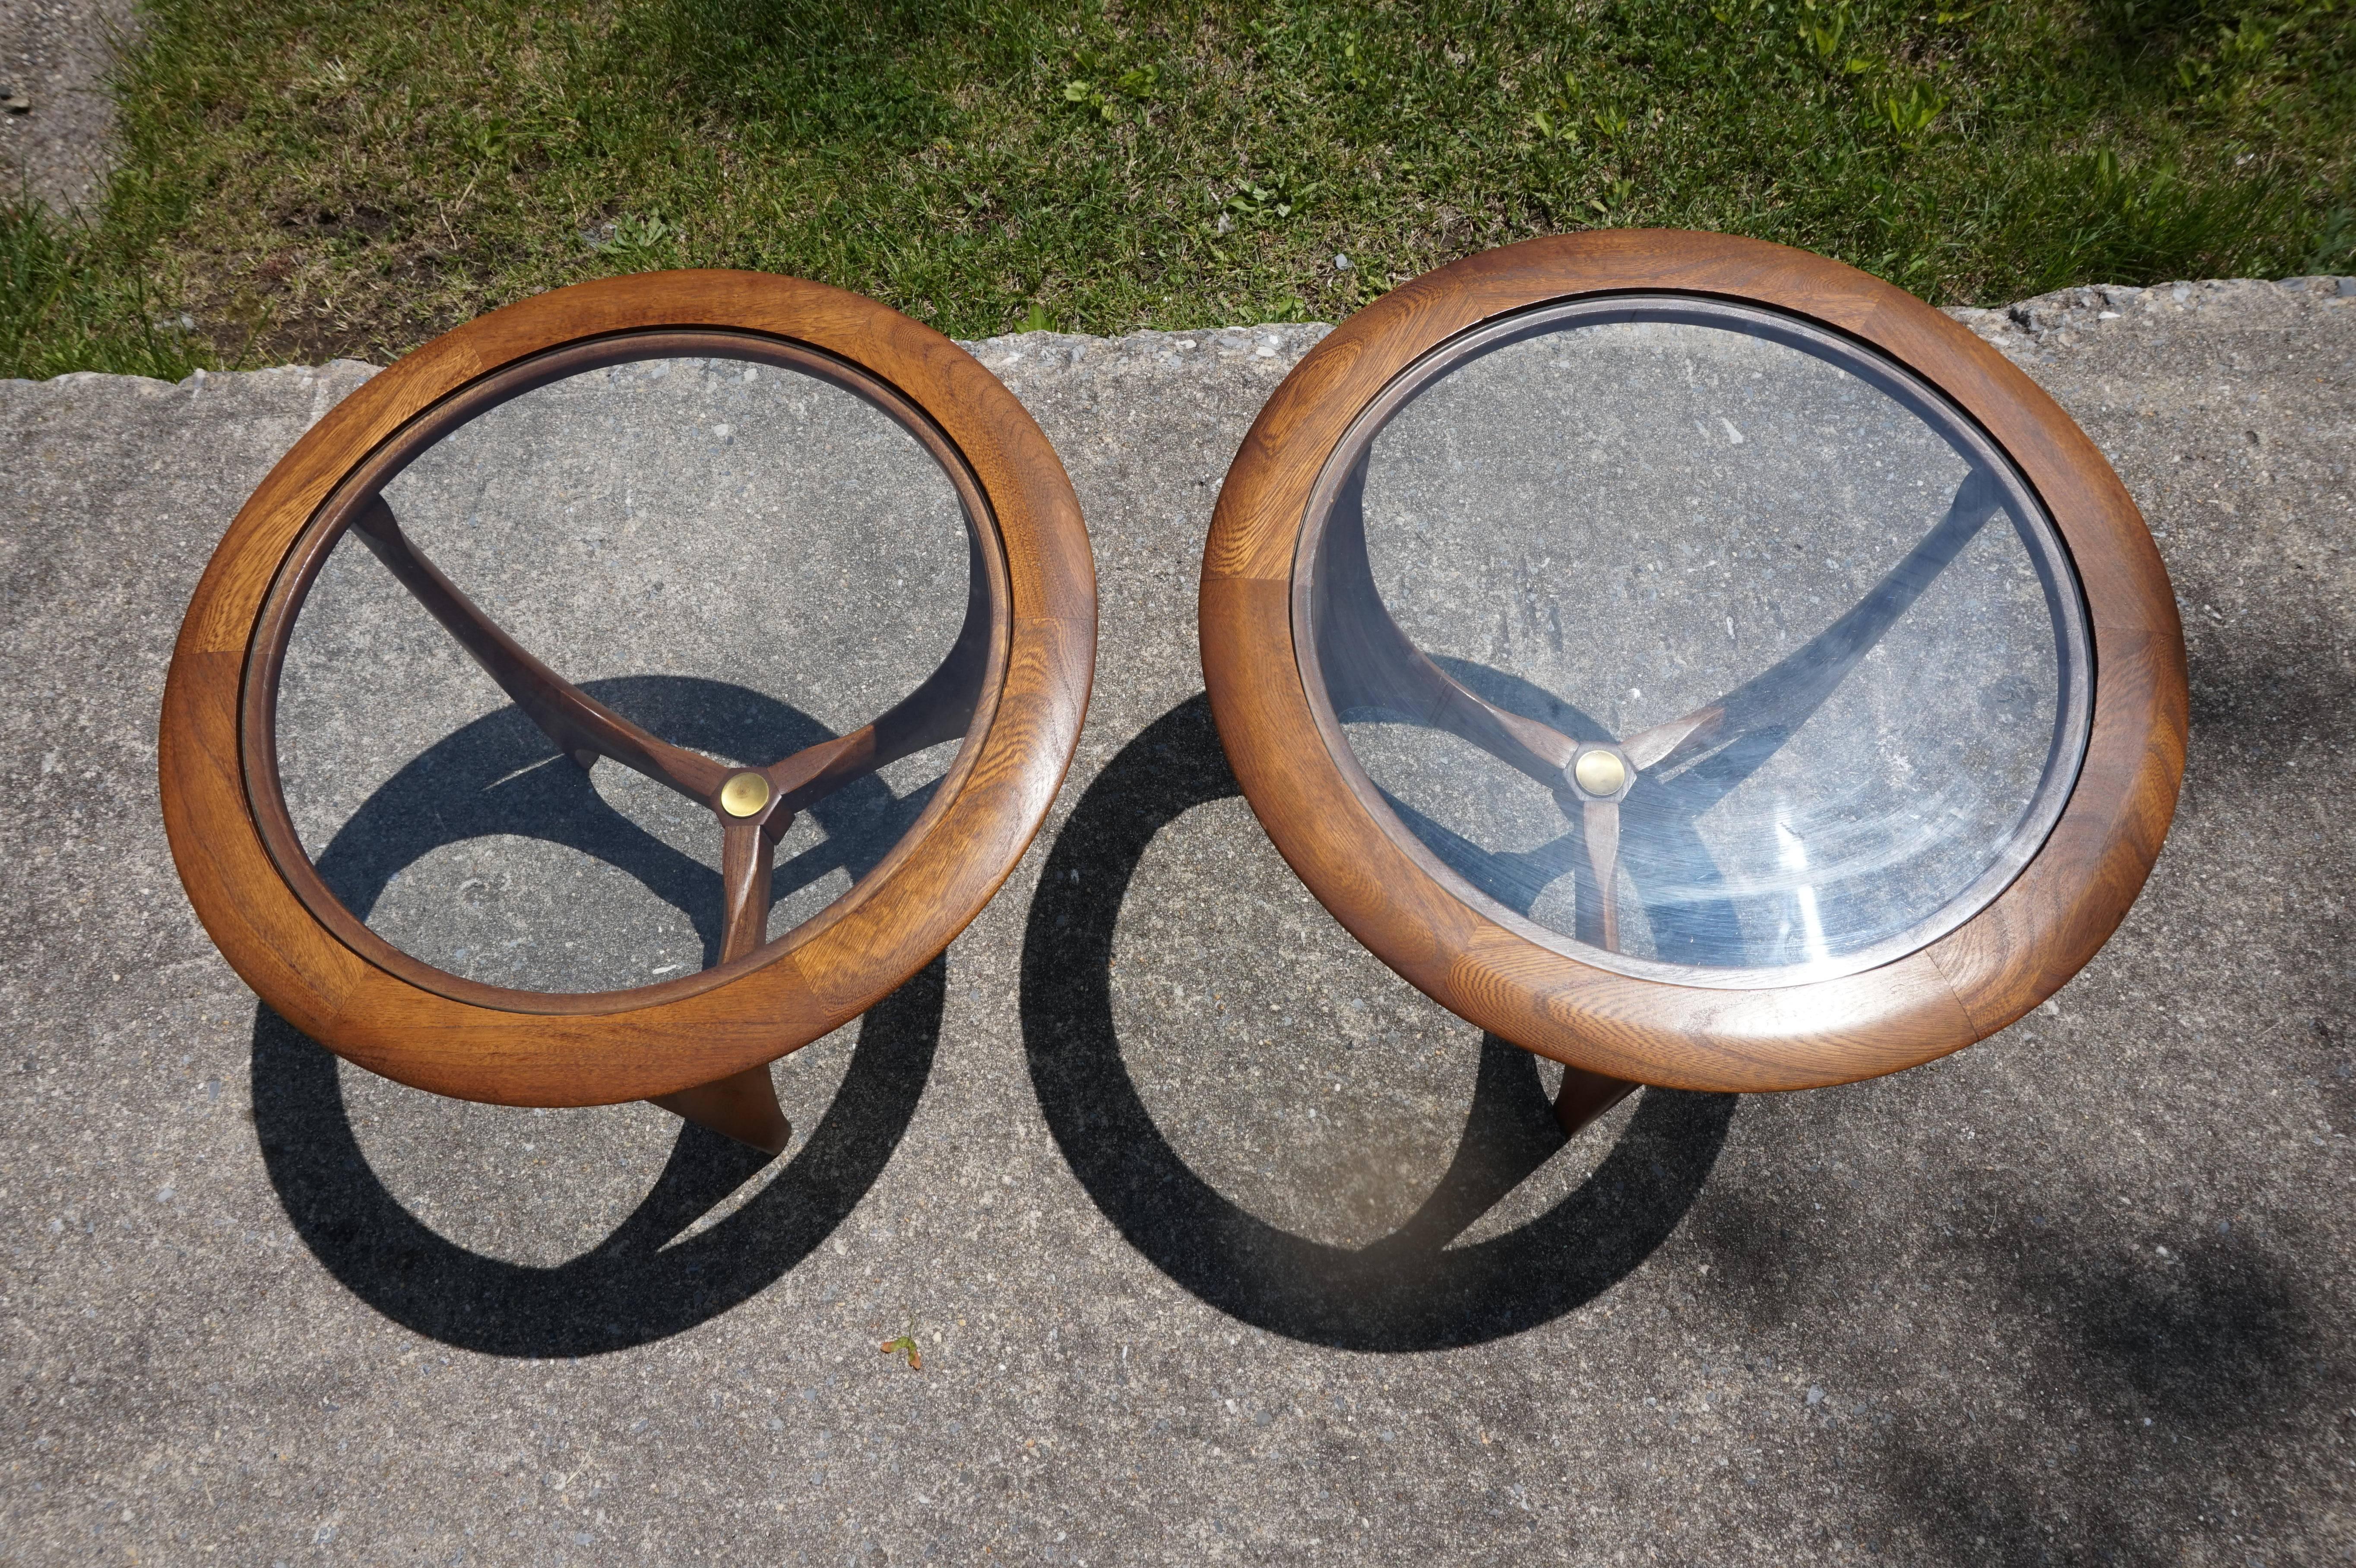 Lovely pair of petite round side tables by Lane. Tables have gorgeous sculptural light walnut with original finish and brass medallions intact. Tables measure 14.5